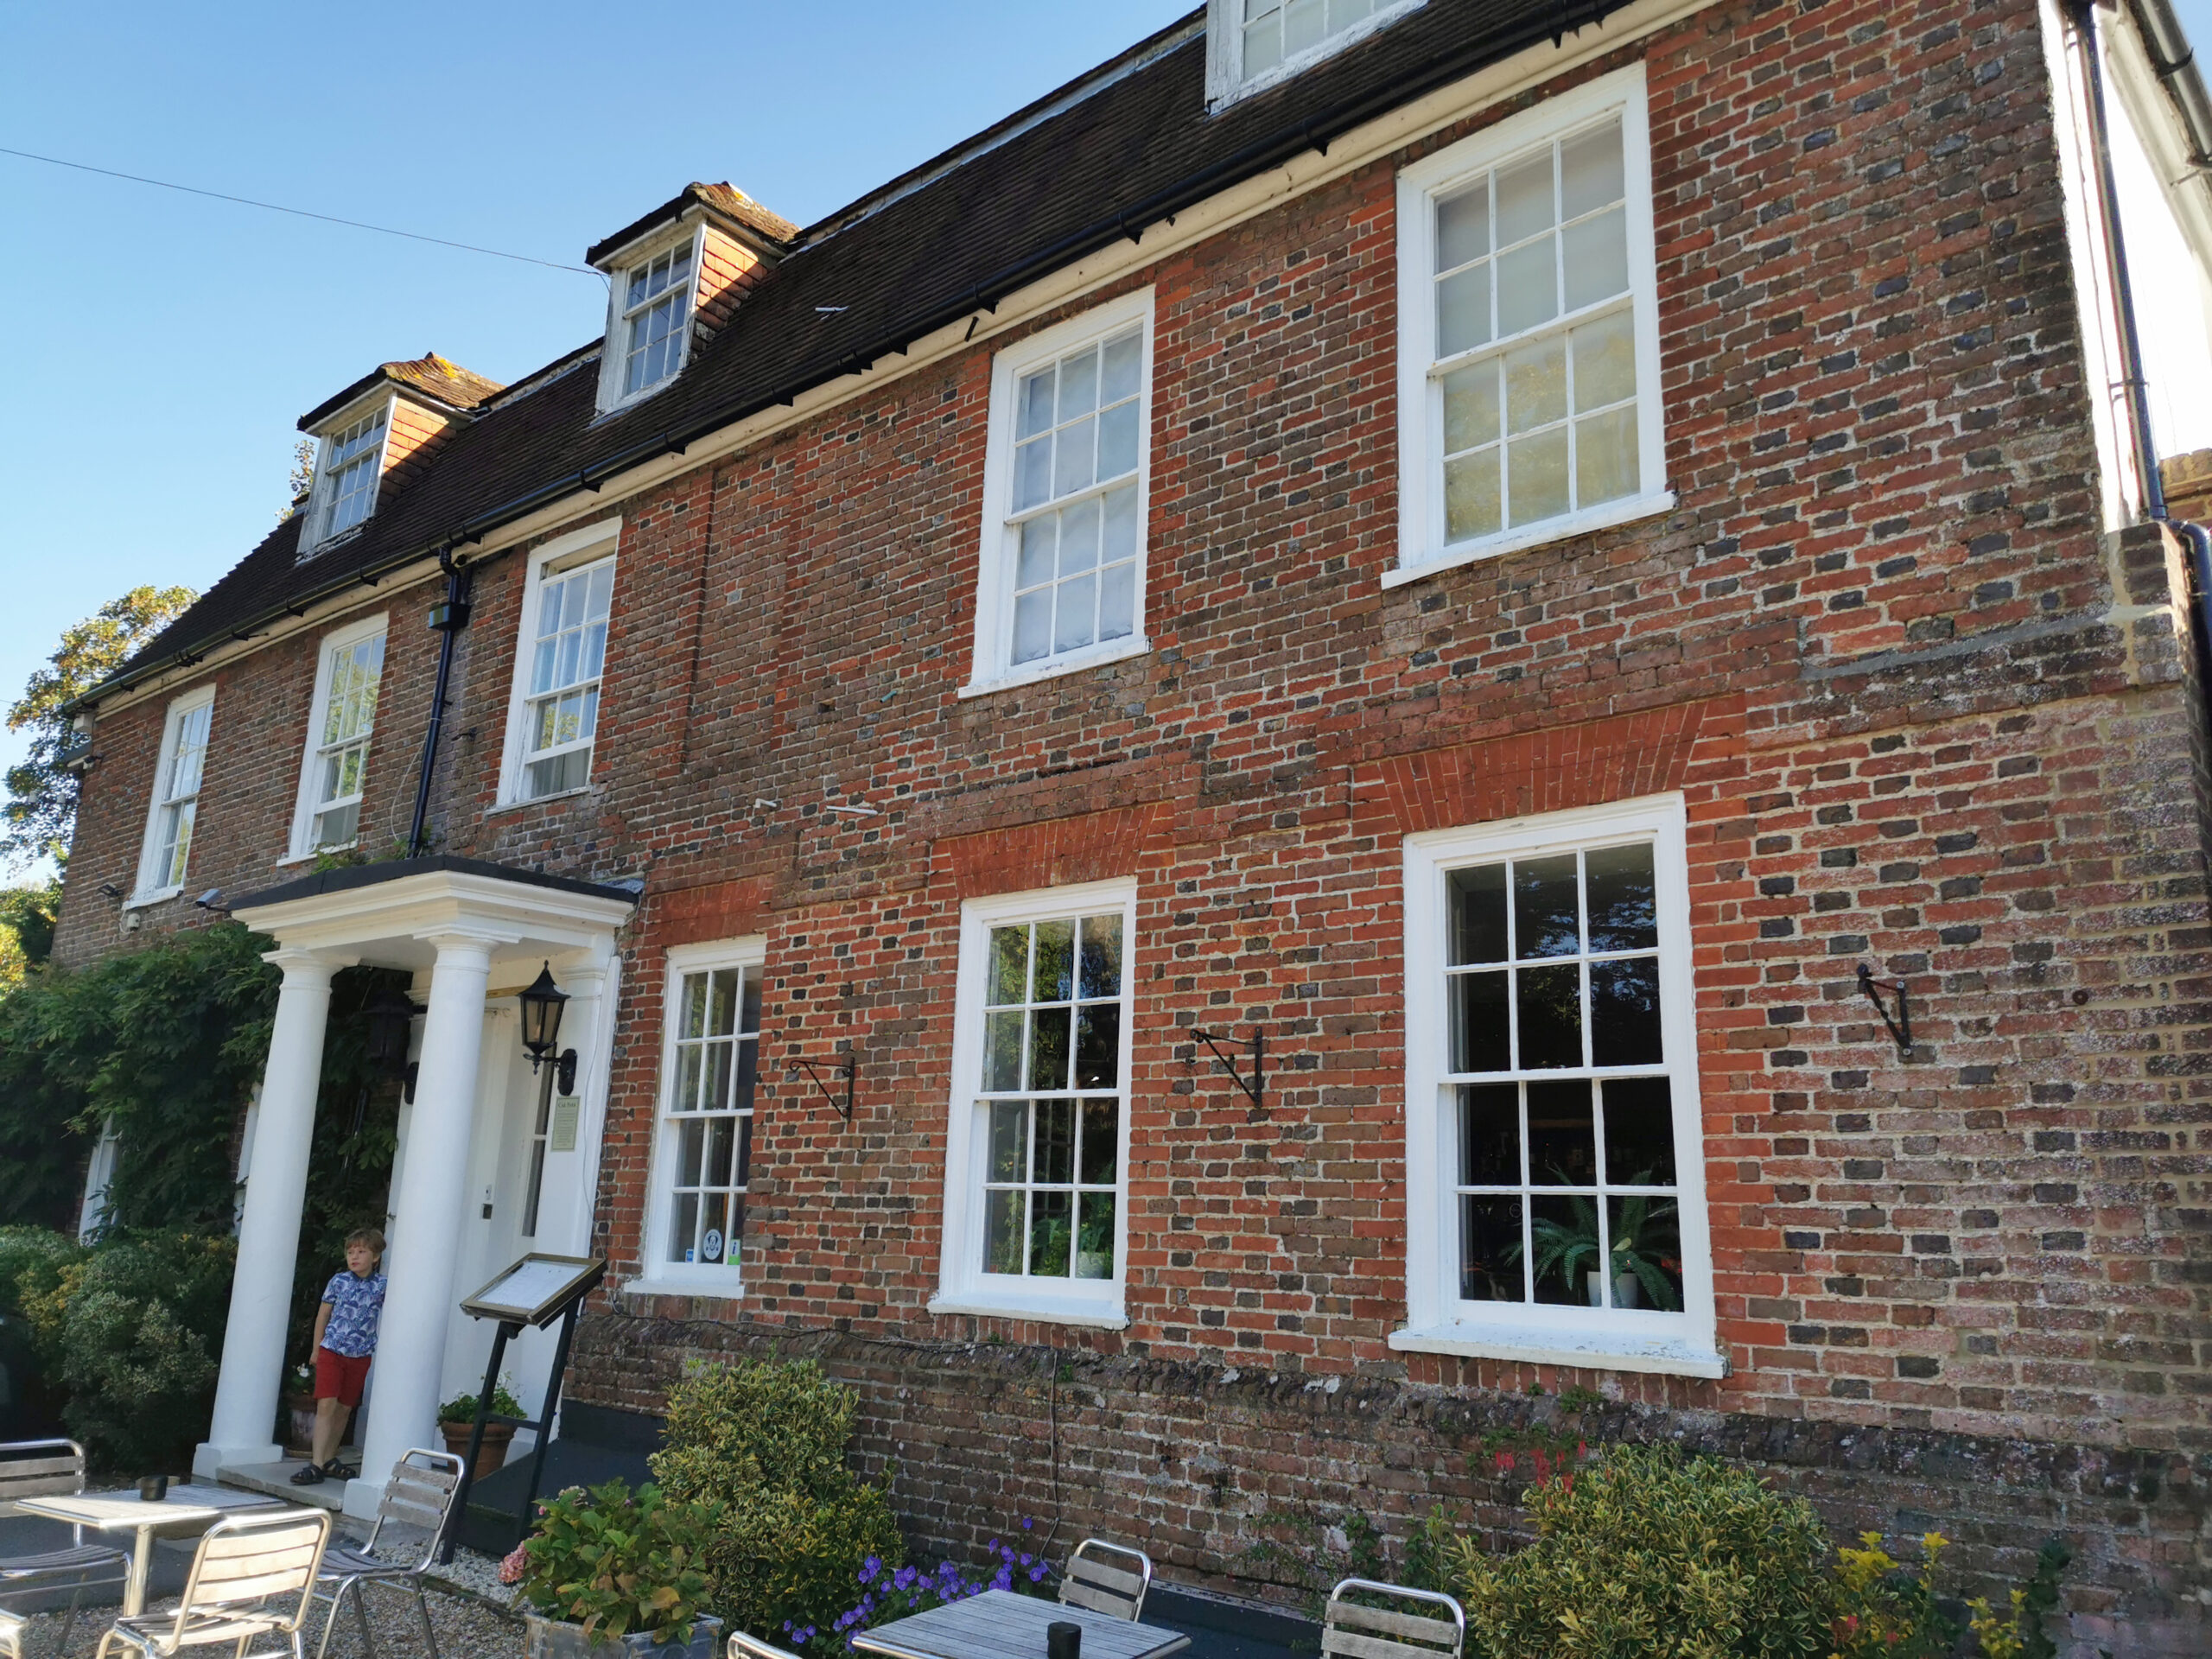 The Flackley Ash Hotel, Country House Hotel, Visit Sussex, Rye, Peamarsh, Country Hotel, Family-friendly, Hotel Review, Staycation, the Frenchie Mummy, UK Break